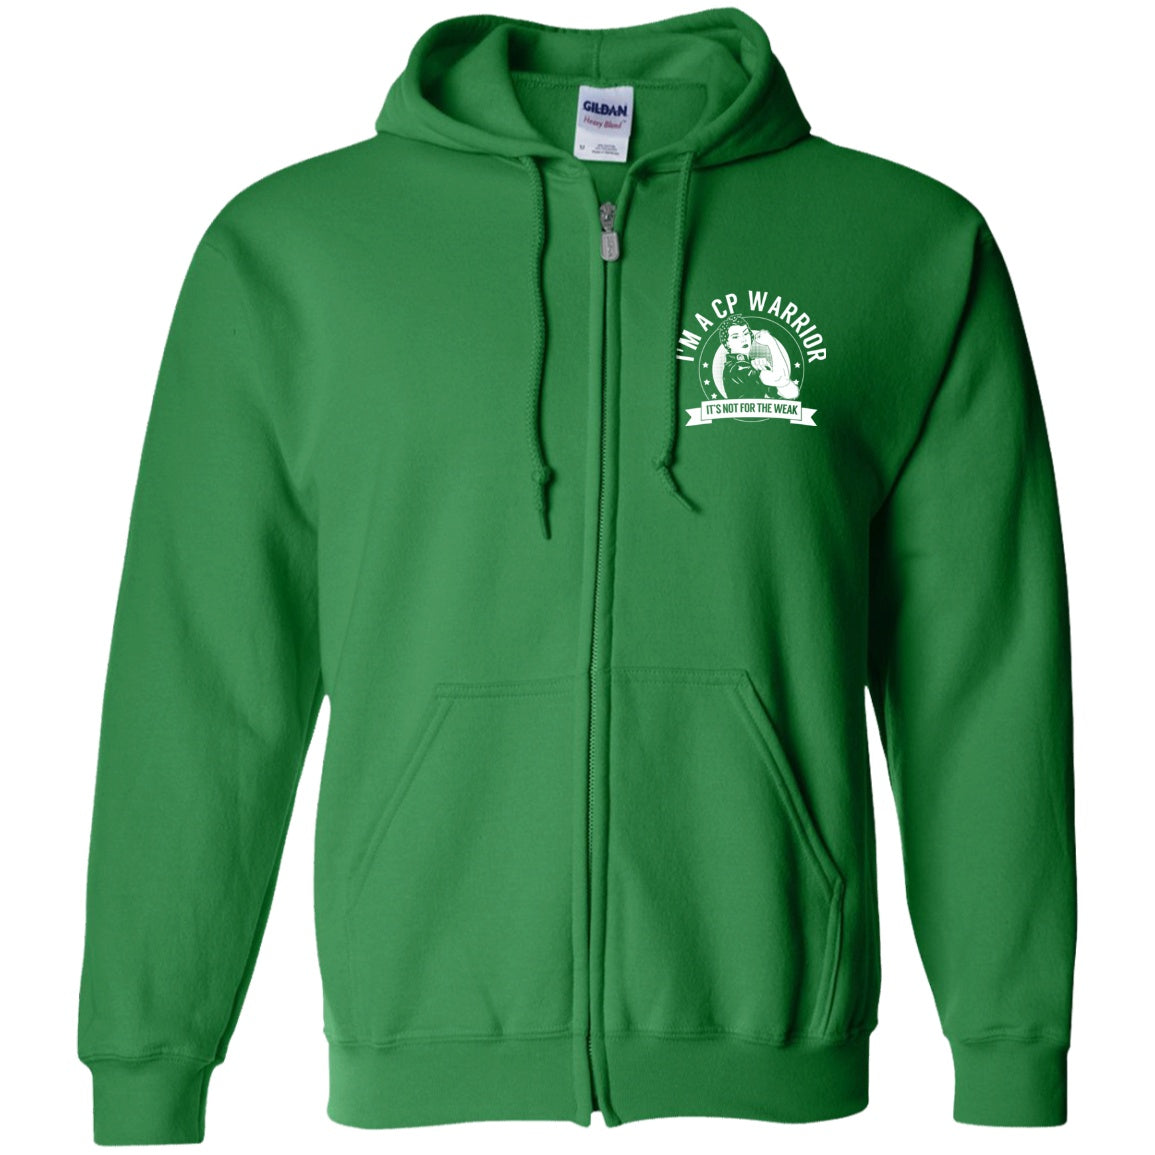 Cerebral Palsy - CP Warrior NFTW Zip Up Hooded Sweatshirt - The Unchargeables